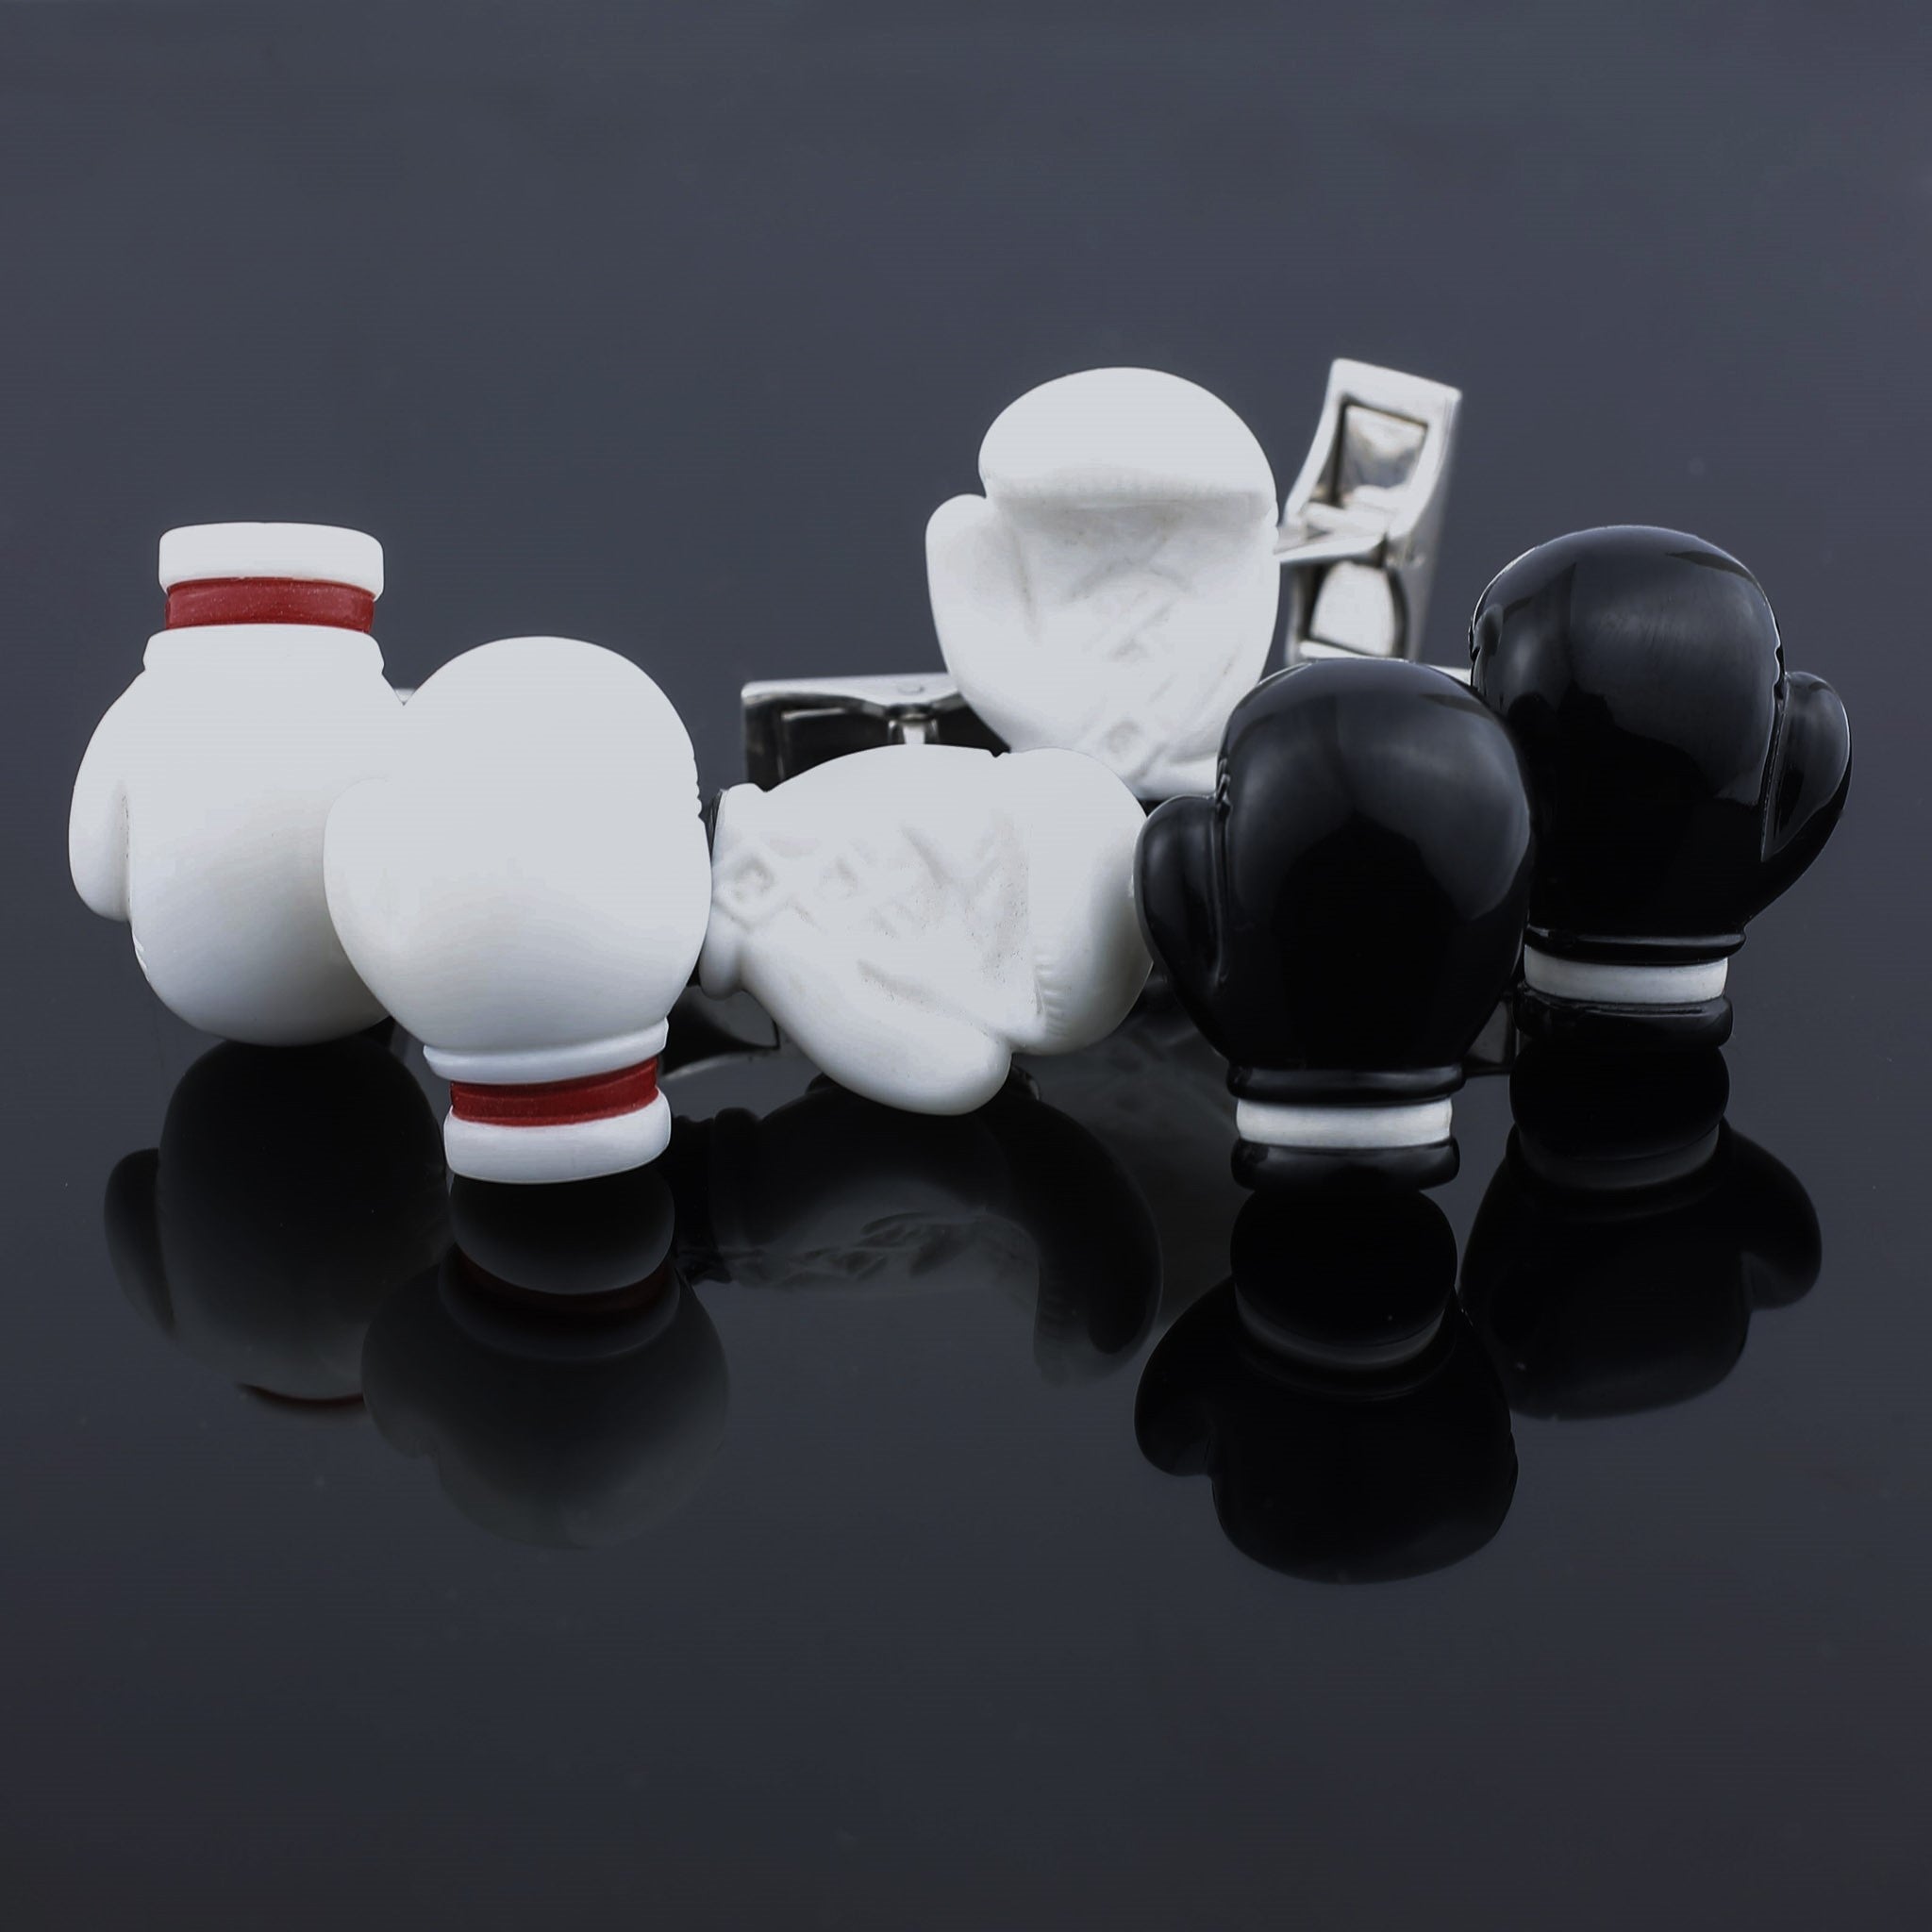 boxing glove cufflinks cacholong & coral/onyx